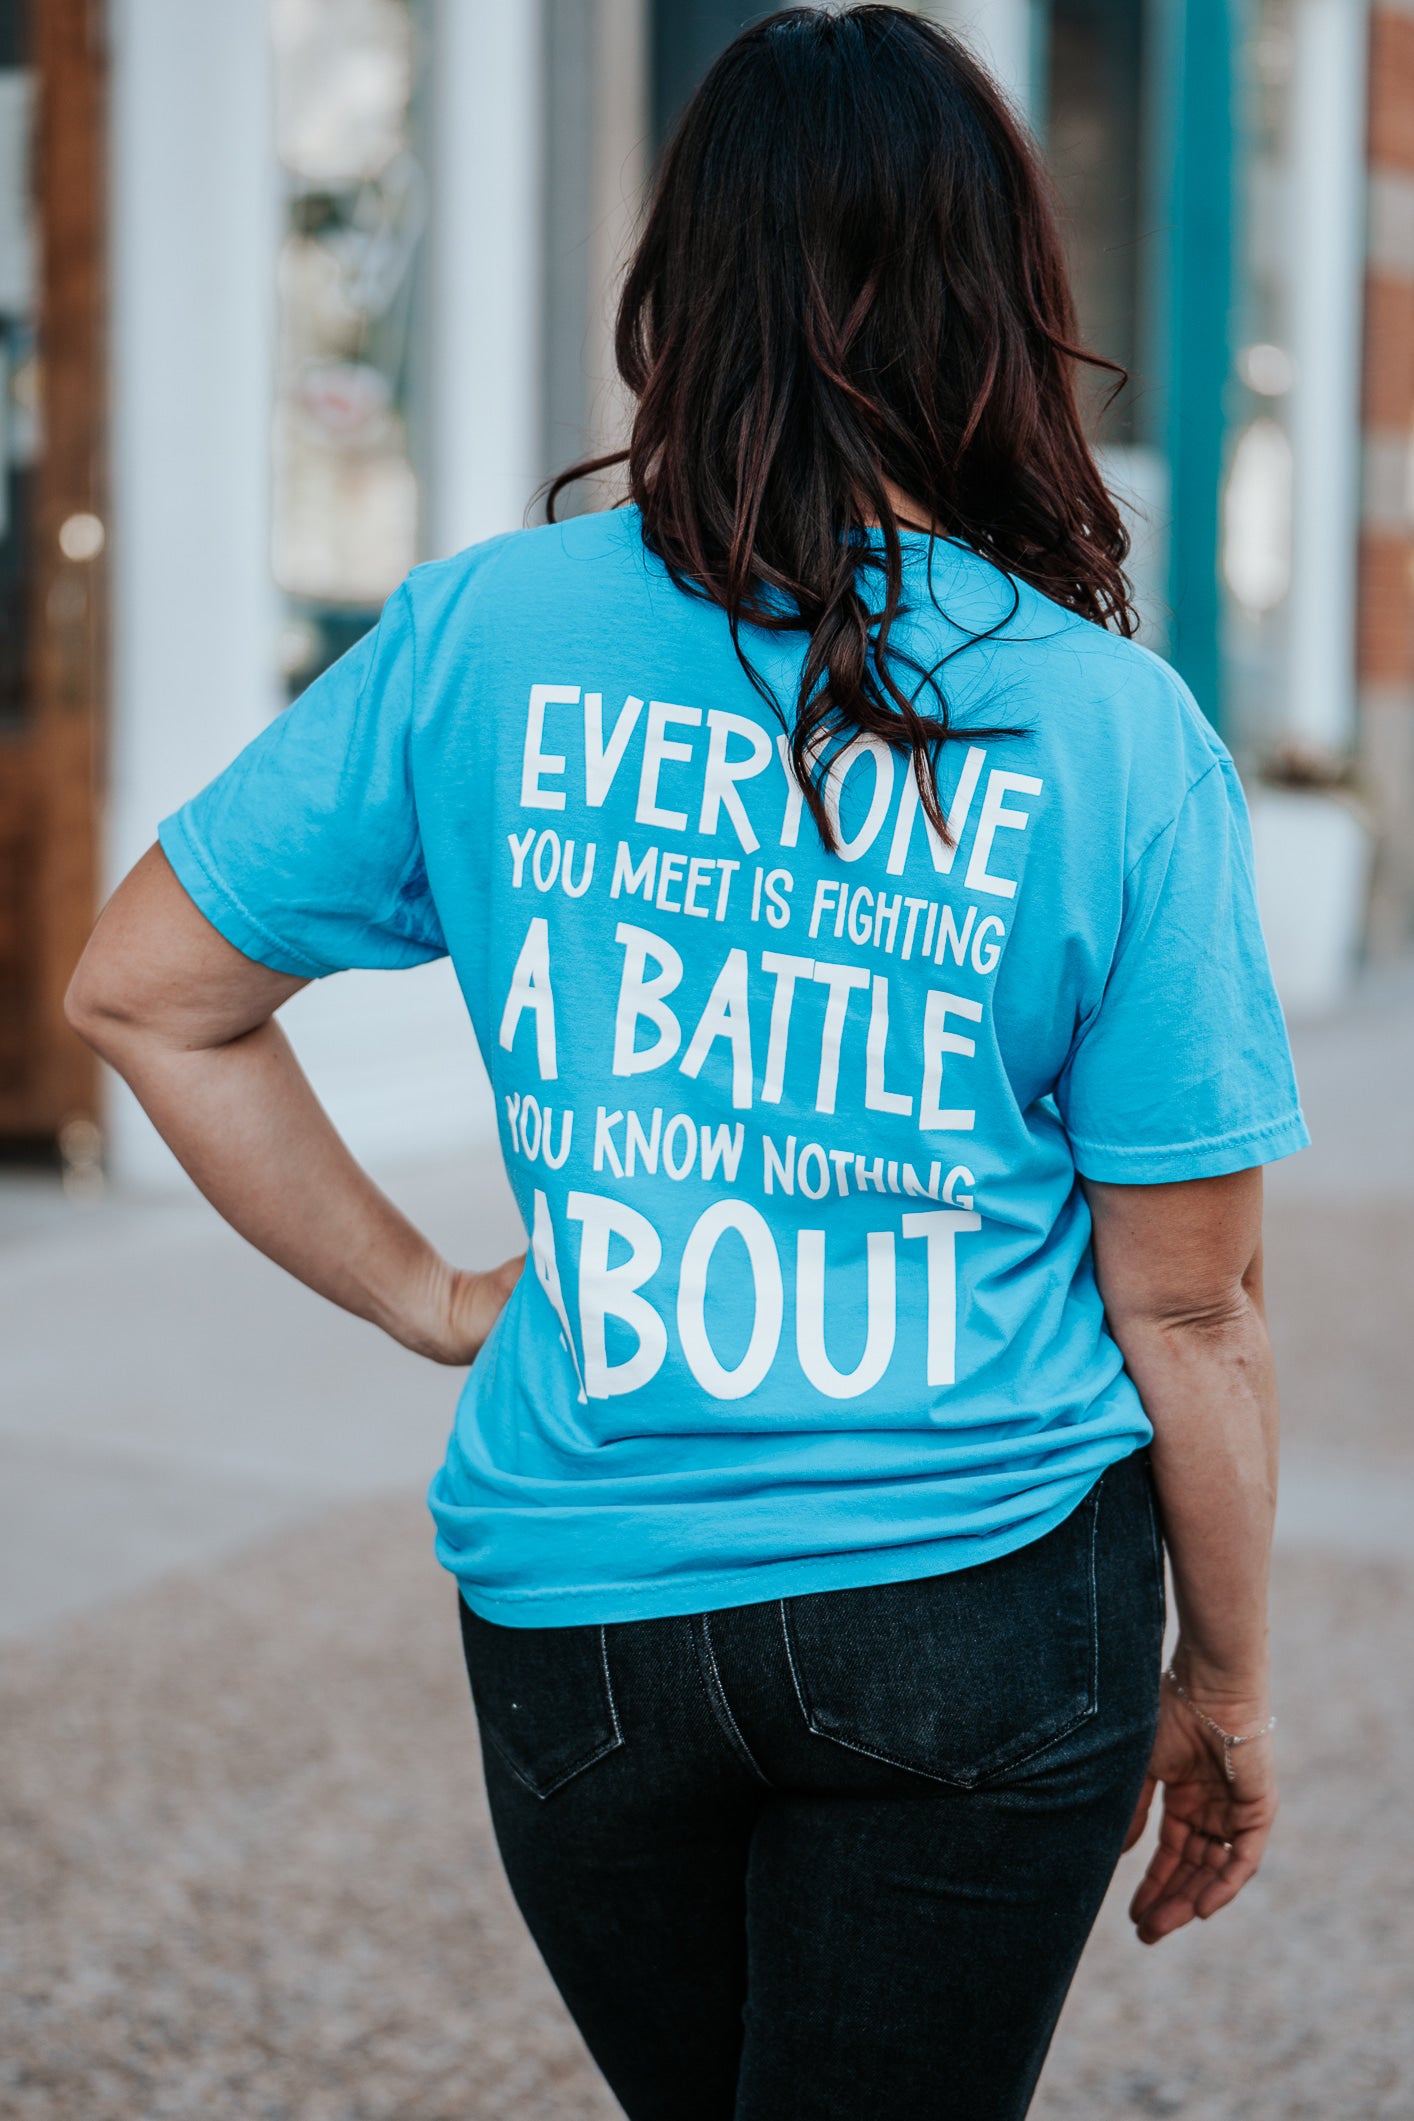 Be Kind blue tshirt back of shirt. Everyone you meet is fighting a battle you know nothing about.